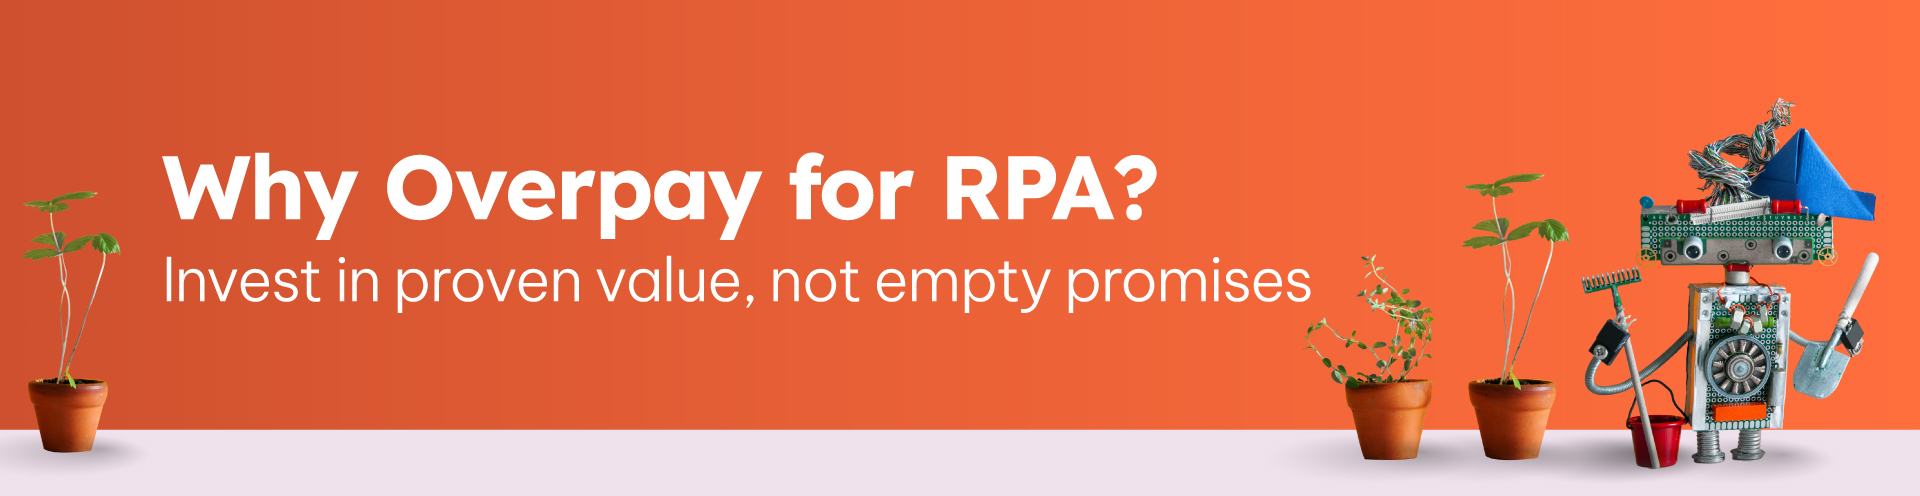 Why Overpay for RPA